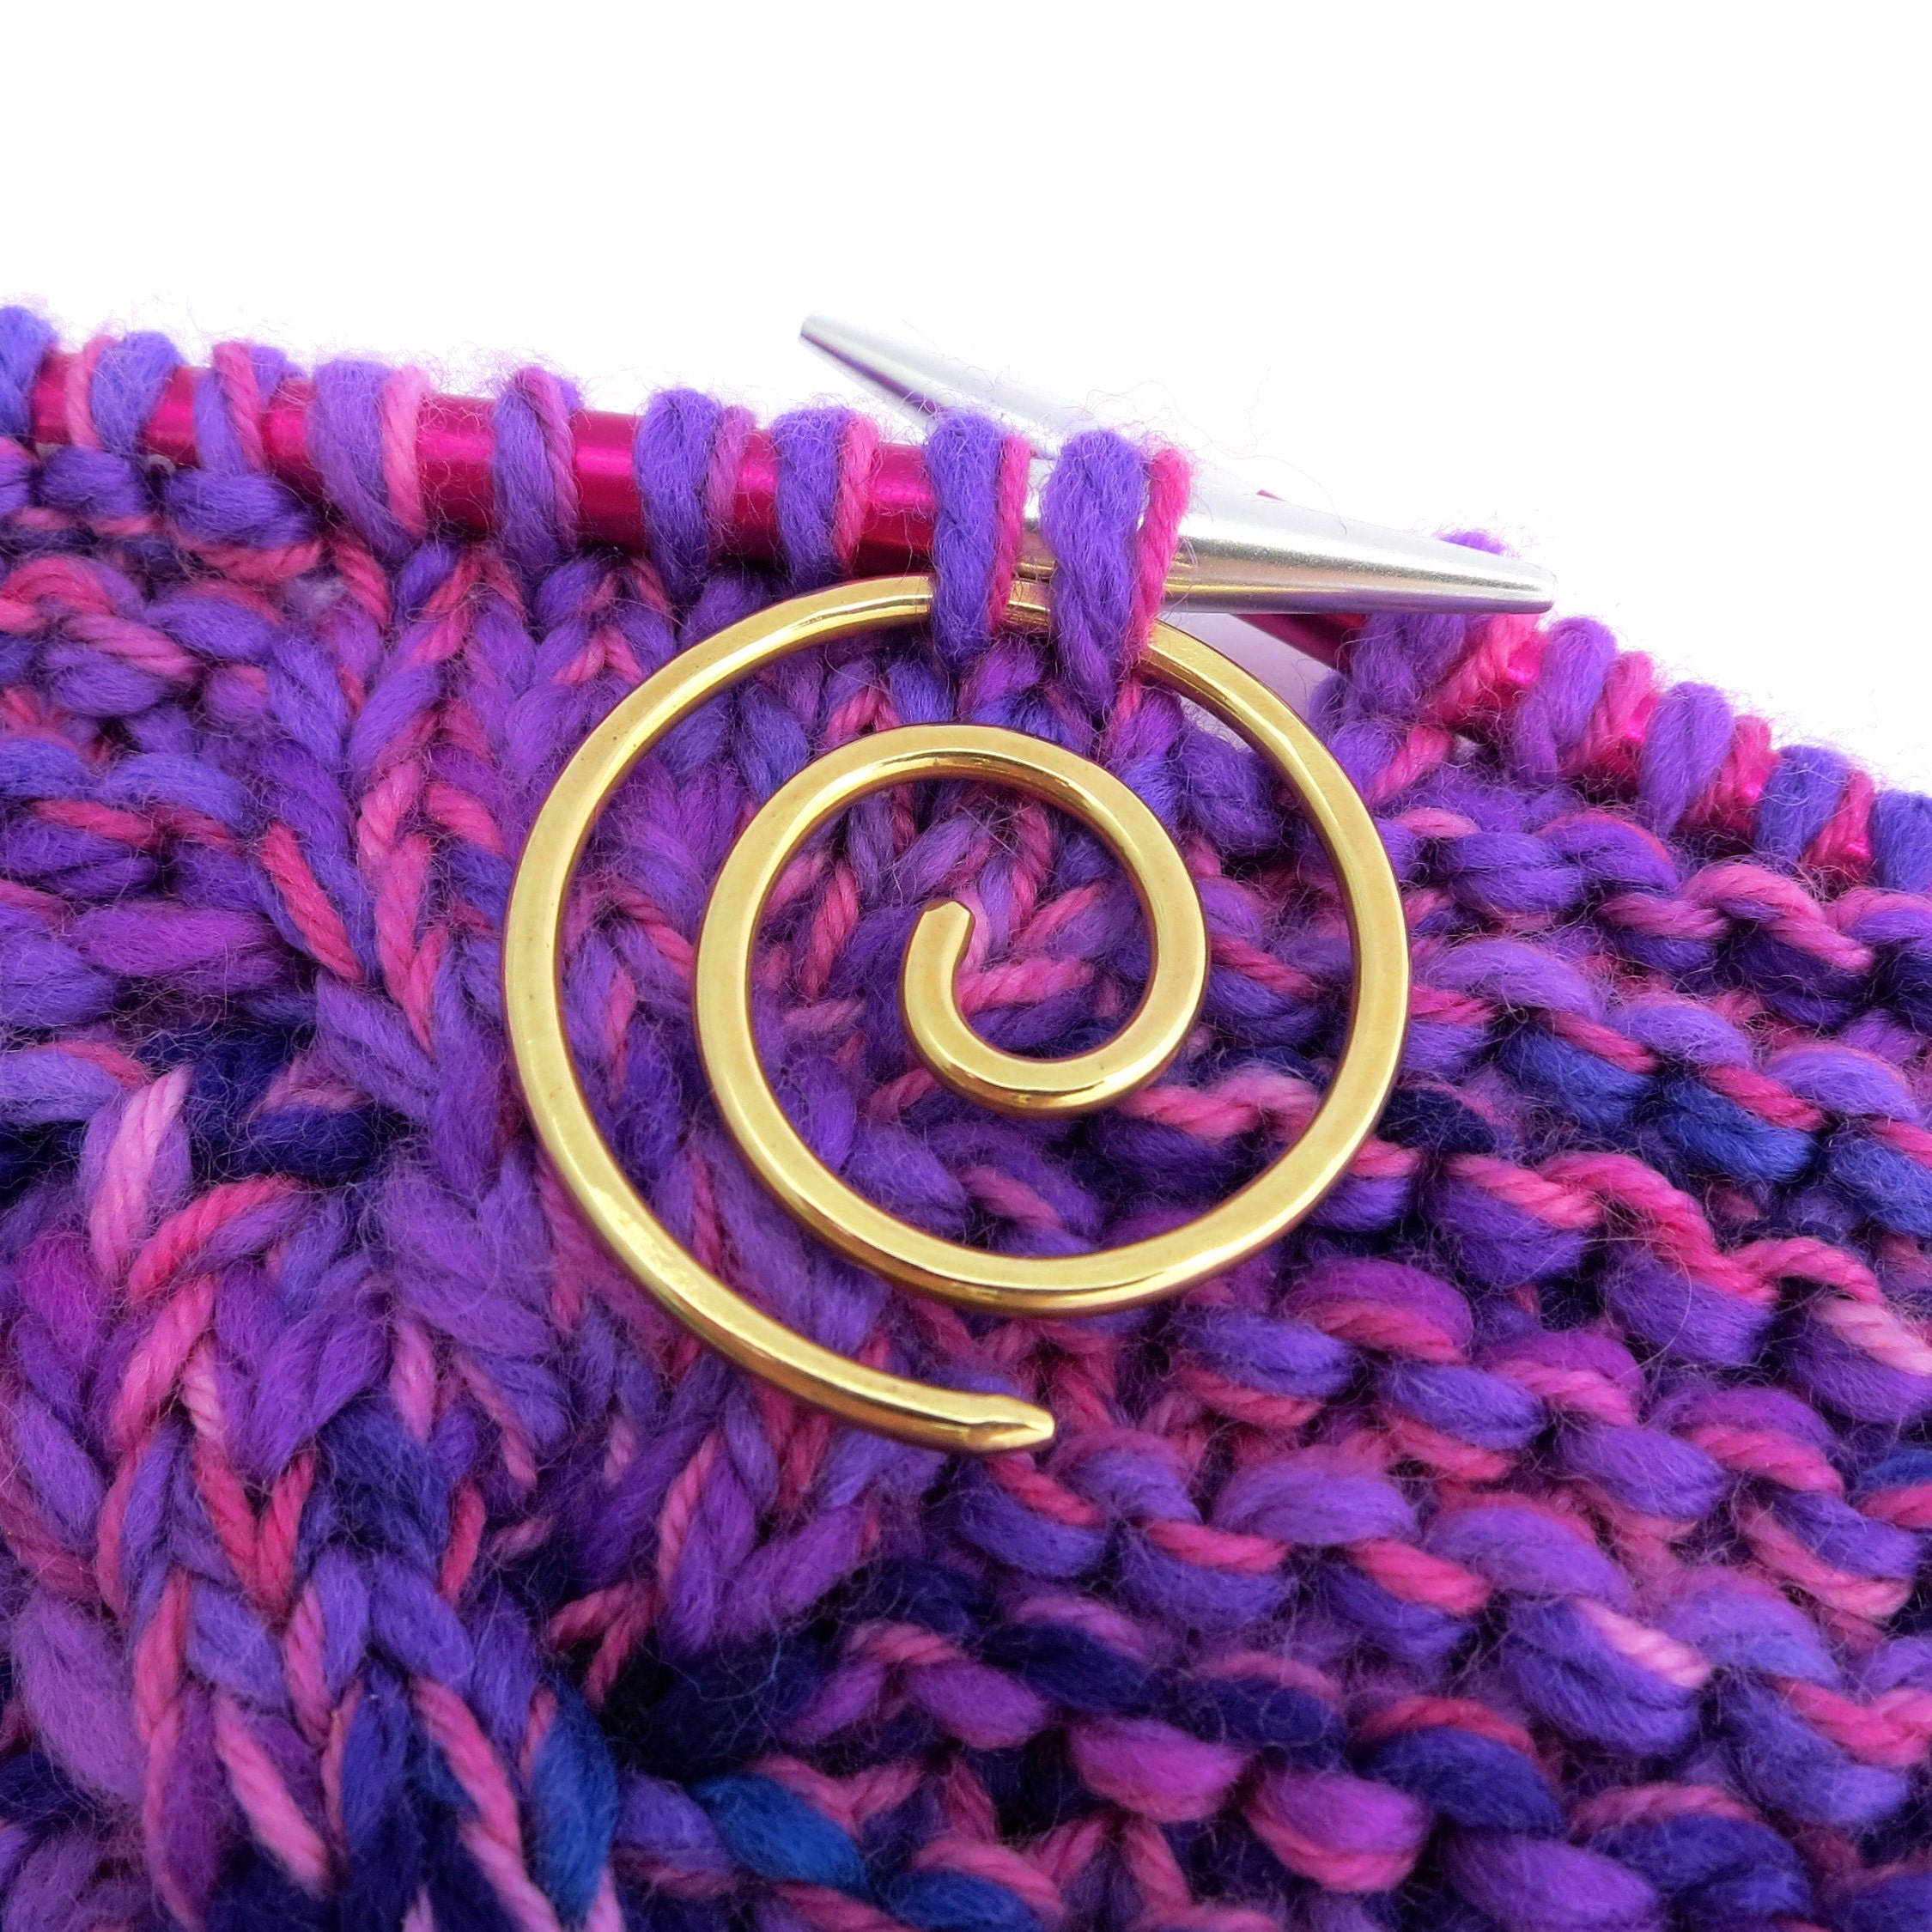 Spiral Cable Knitting Needle, Cable Needle/Shawl Pin, Bent Tapestry Needles  for Yarn Sewing Knitting,Small Spiral Cable Needle Stitch Holders Gift for  Knitter 